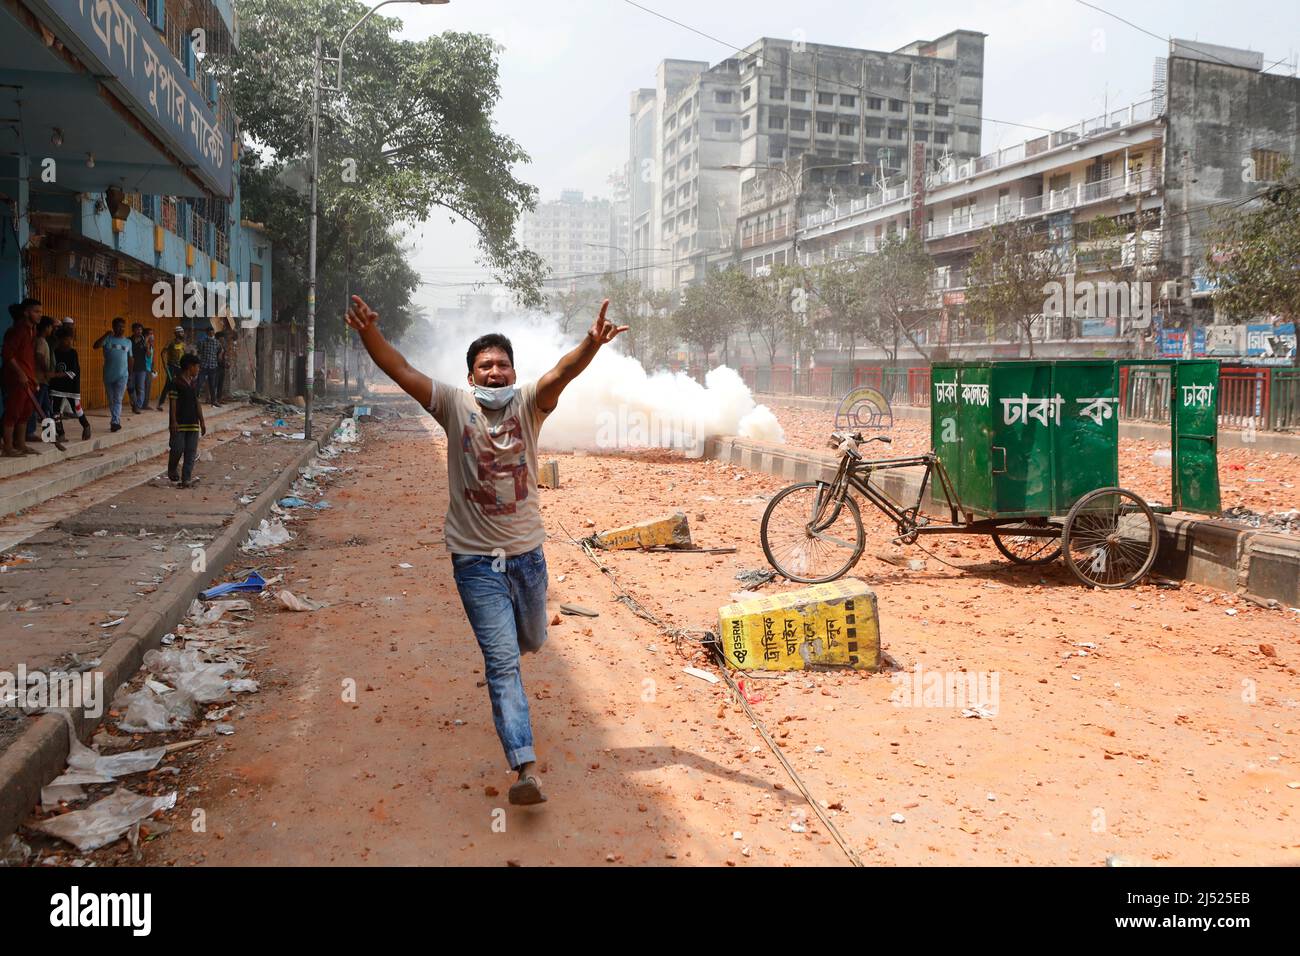 Dhaka, Bangladesh - April 19, 2022: At least 50 people, including journalists, were injured in clashes between students of Dhaka College and businessm Stock Photo